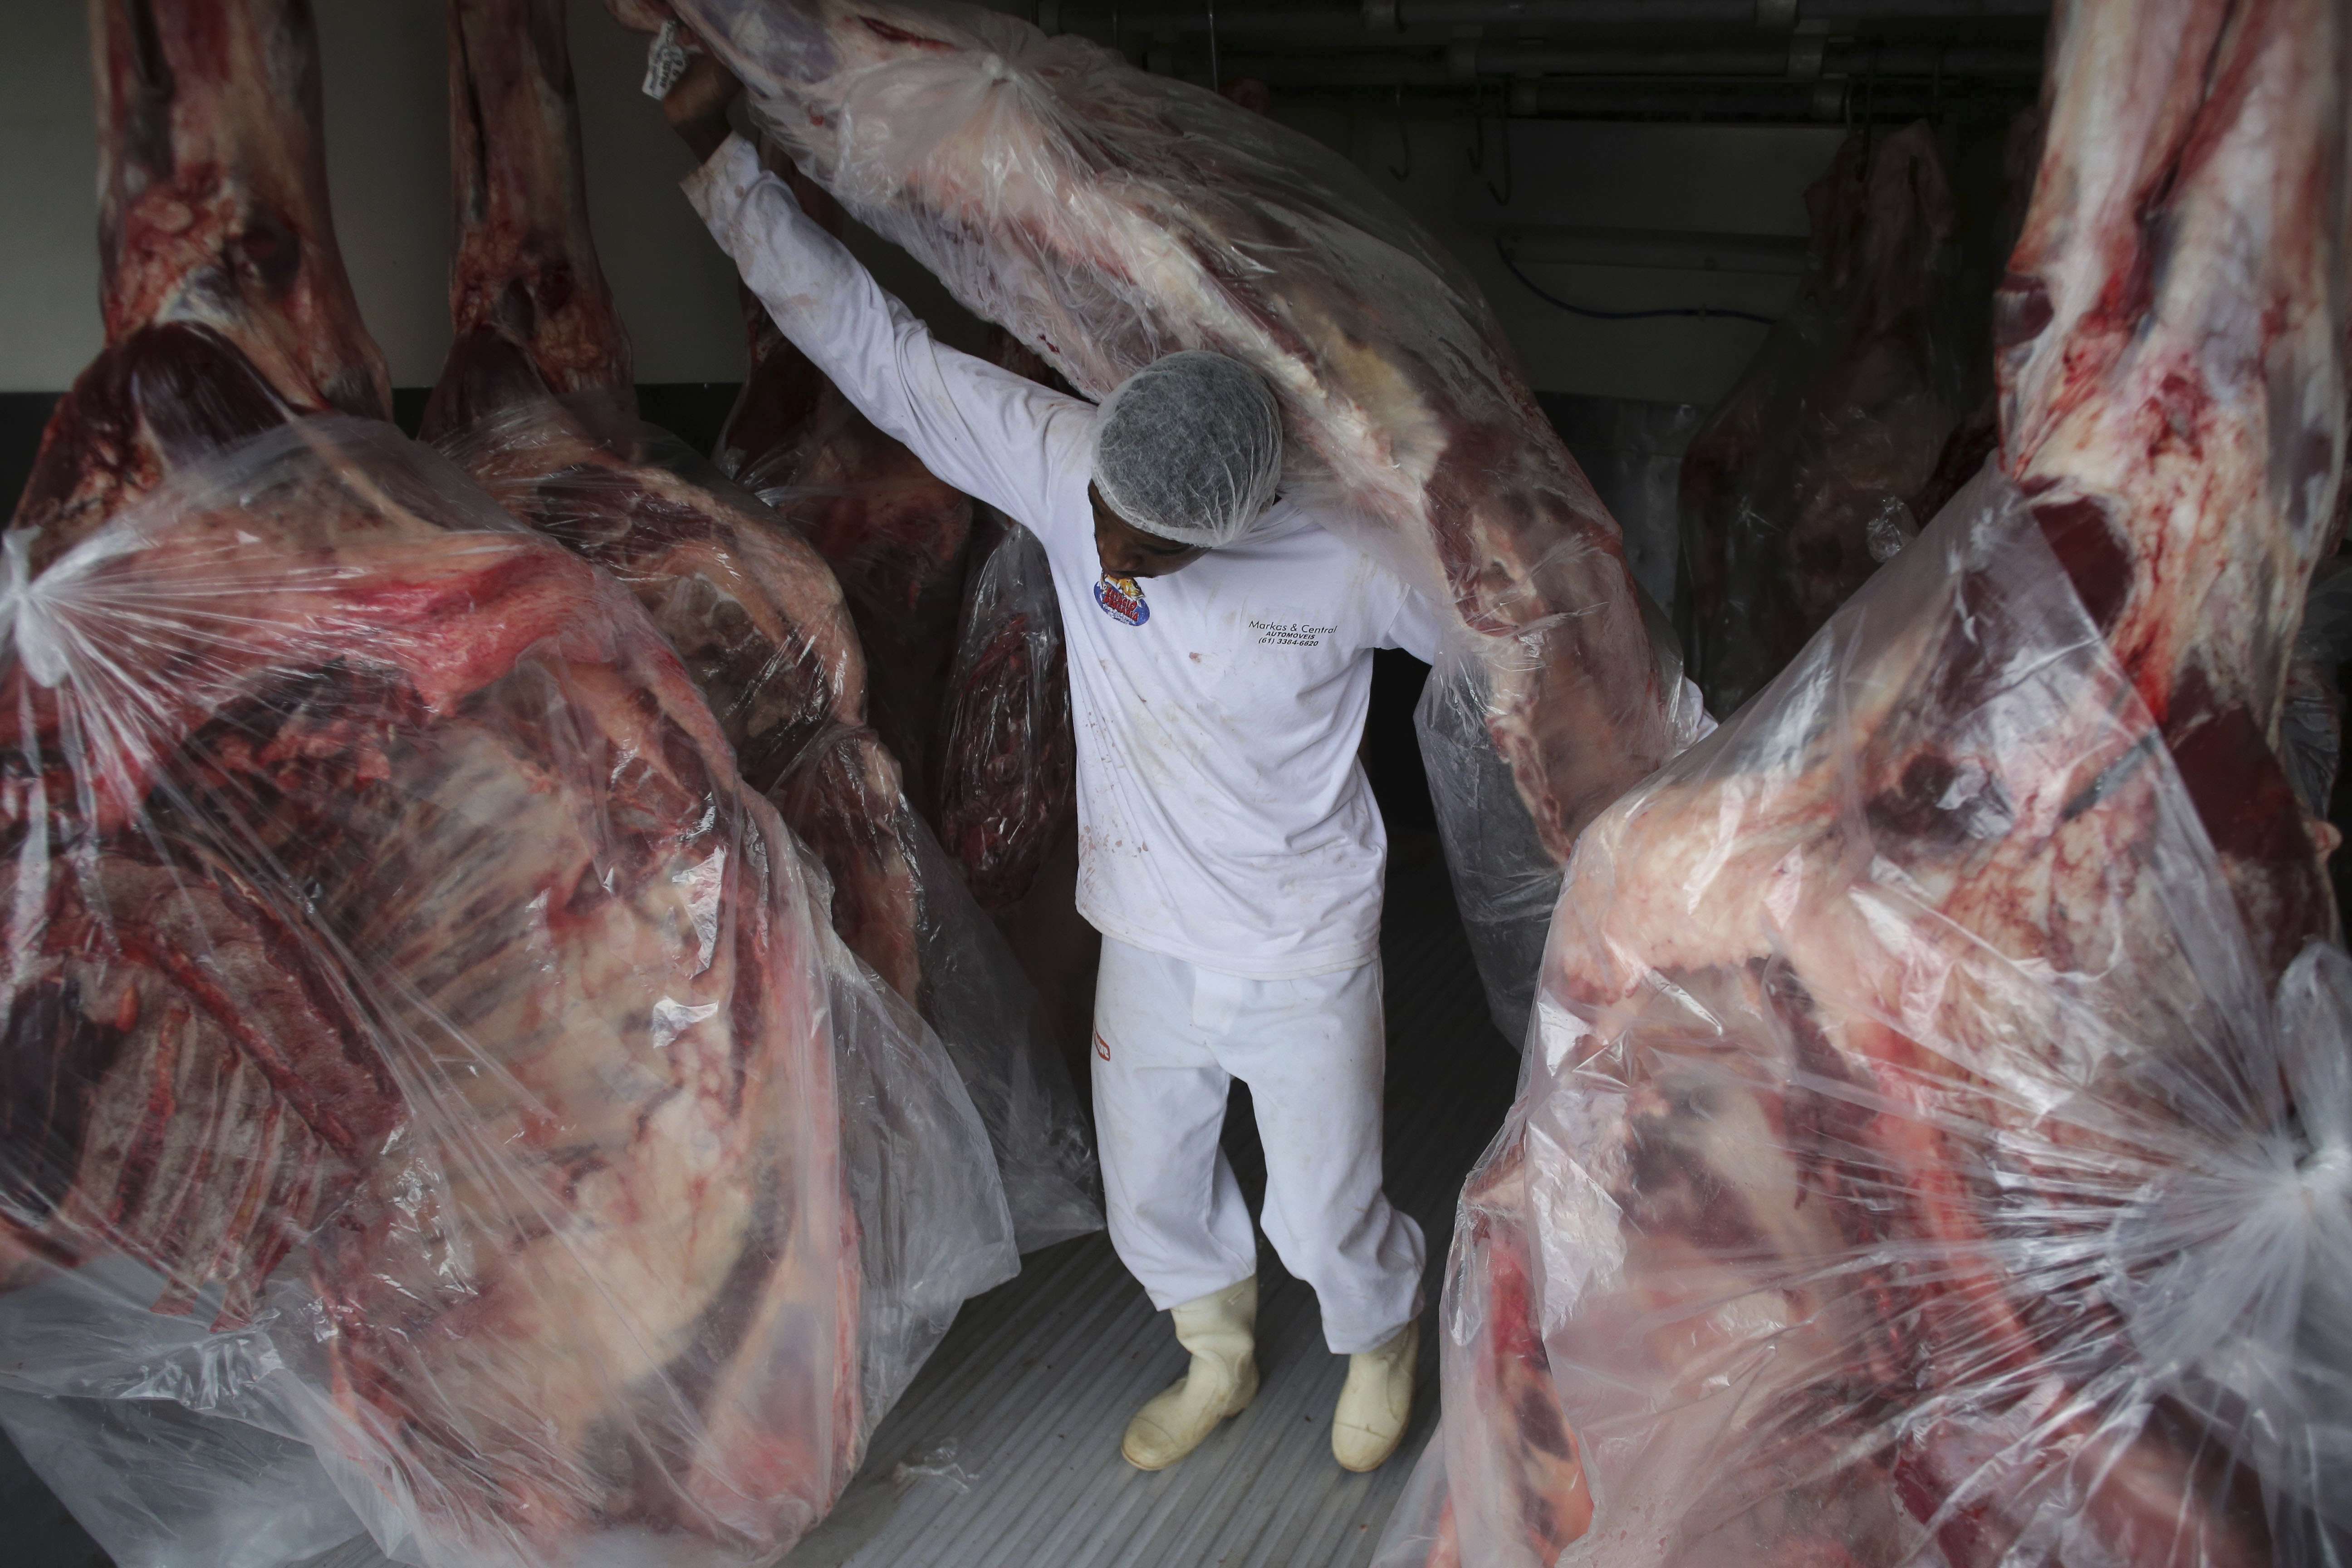 The tainted meat and corruption scandal in Brazil prompted a recall in Hong Kong. Photo: AP